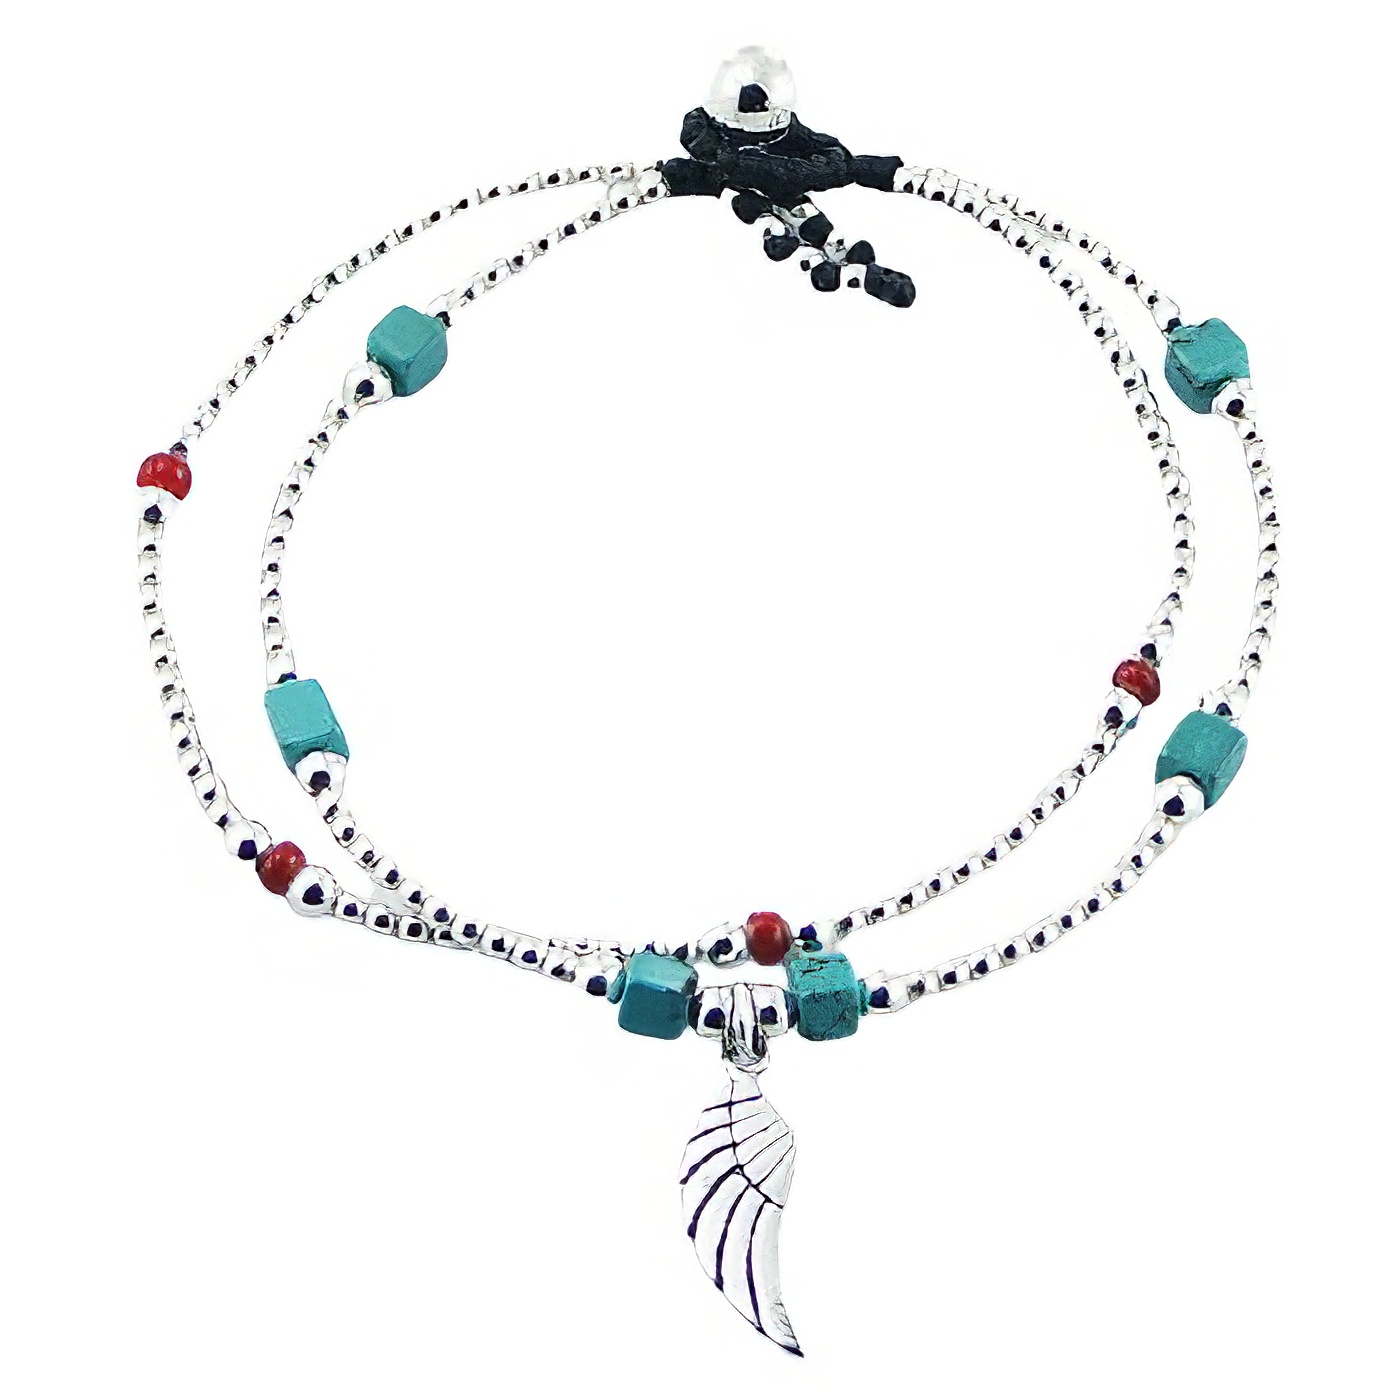 Double Macrame Bracelet Silver, Glass and Turquoise Beads 